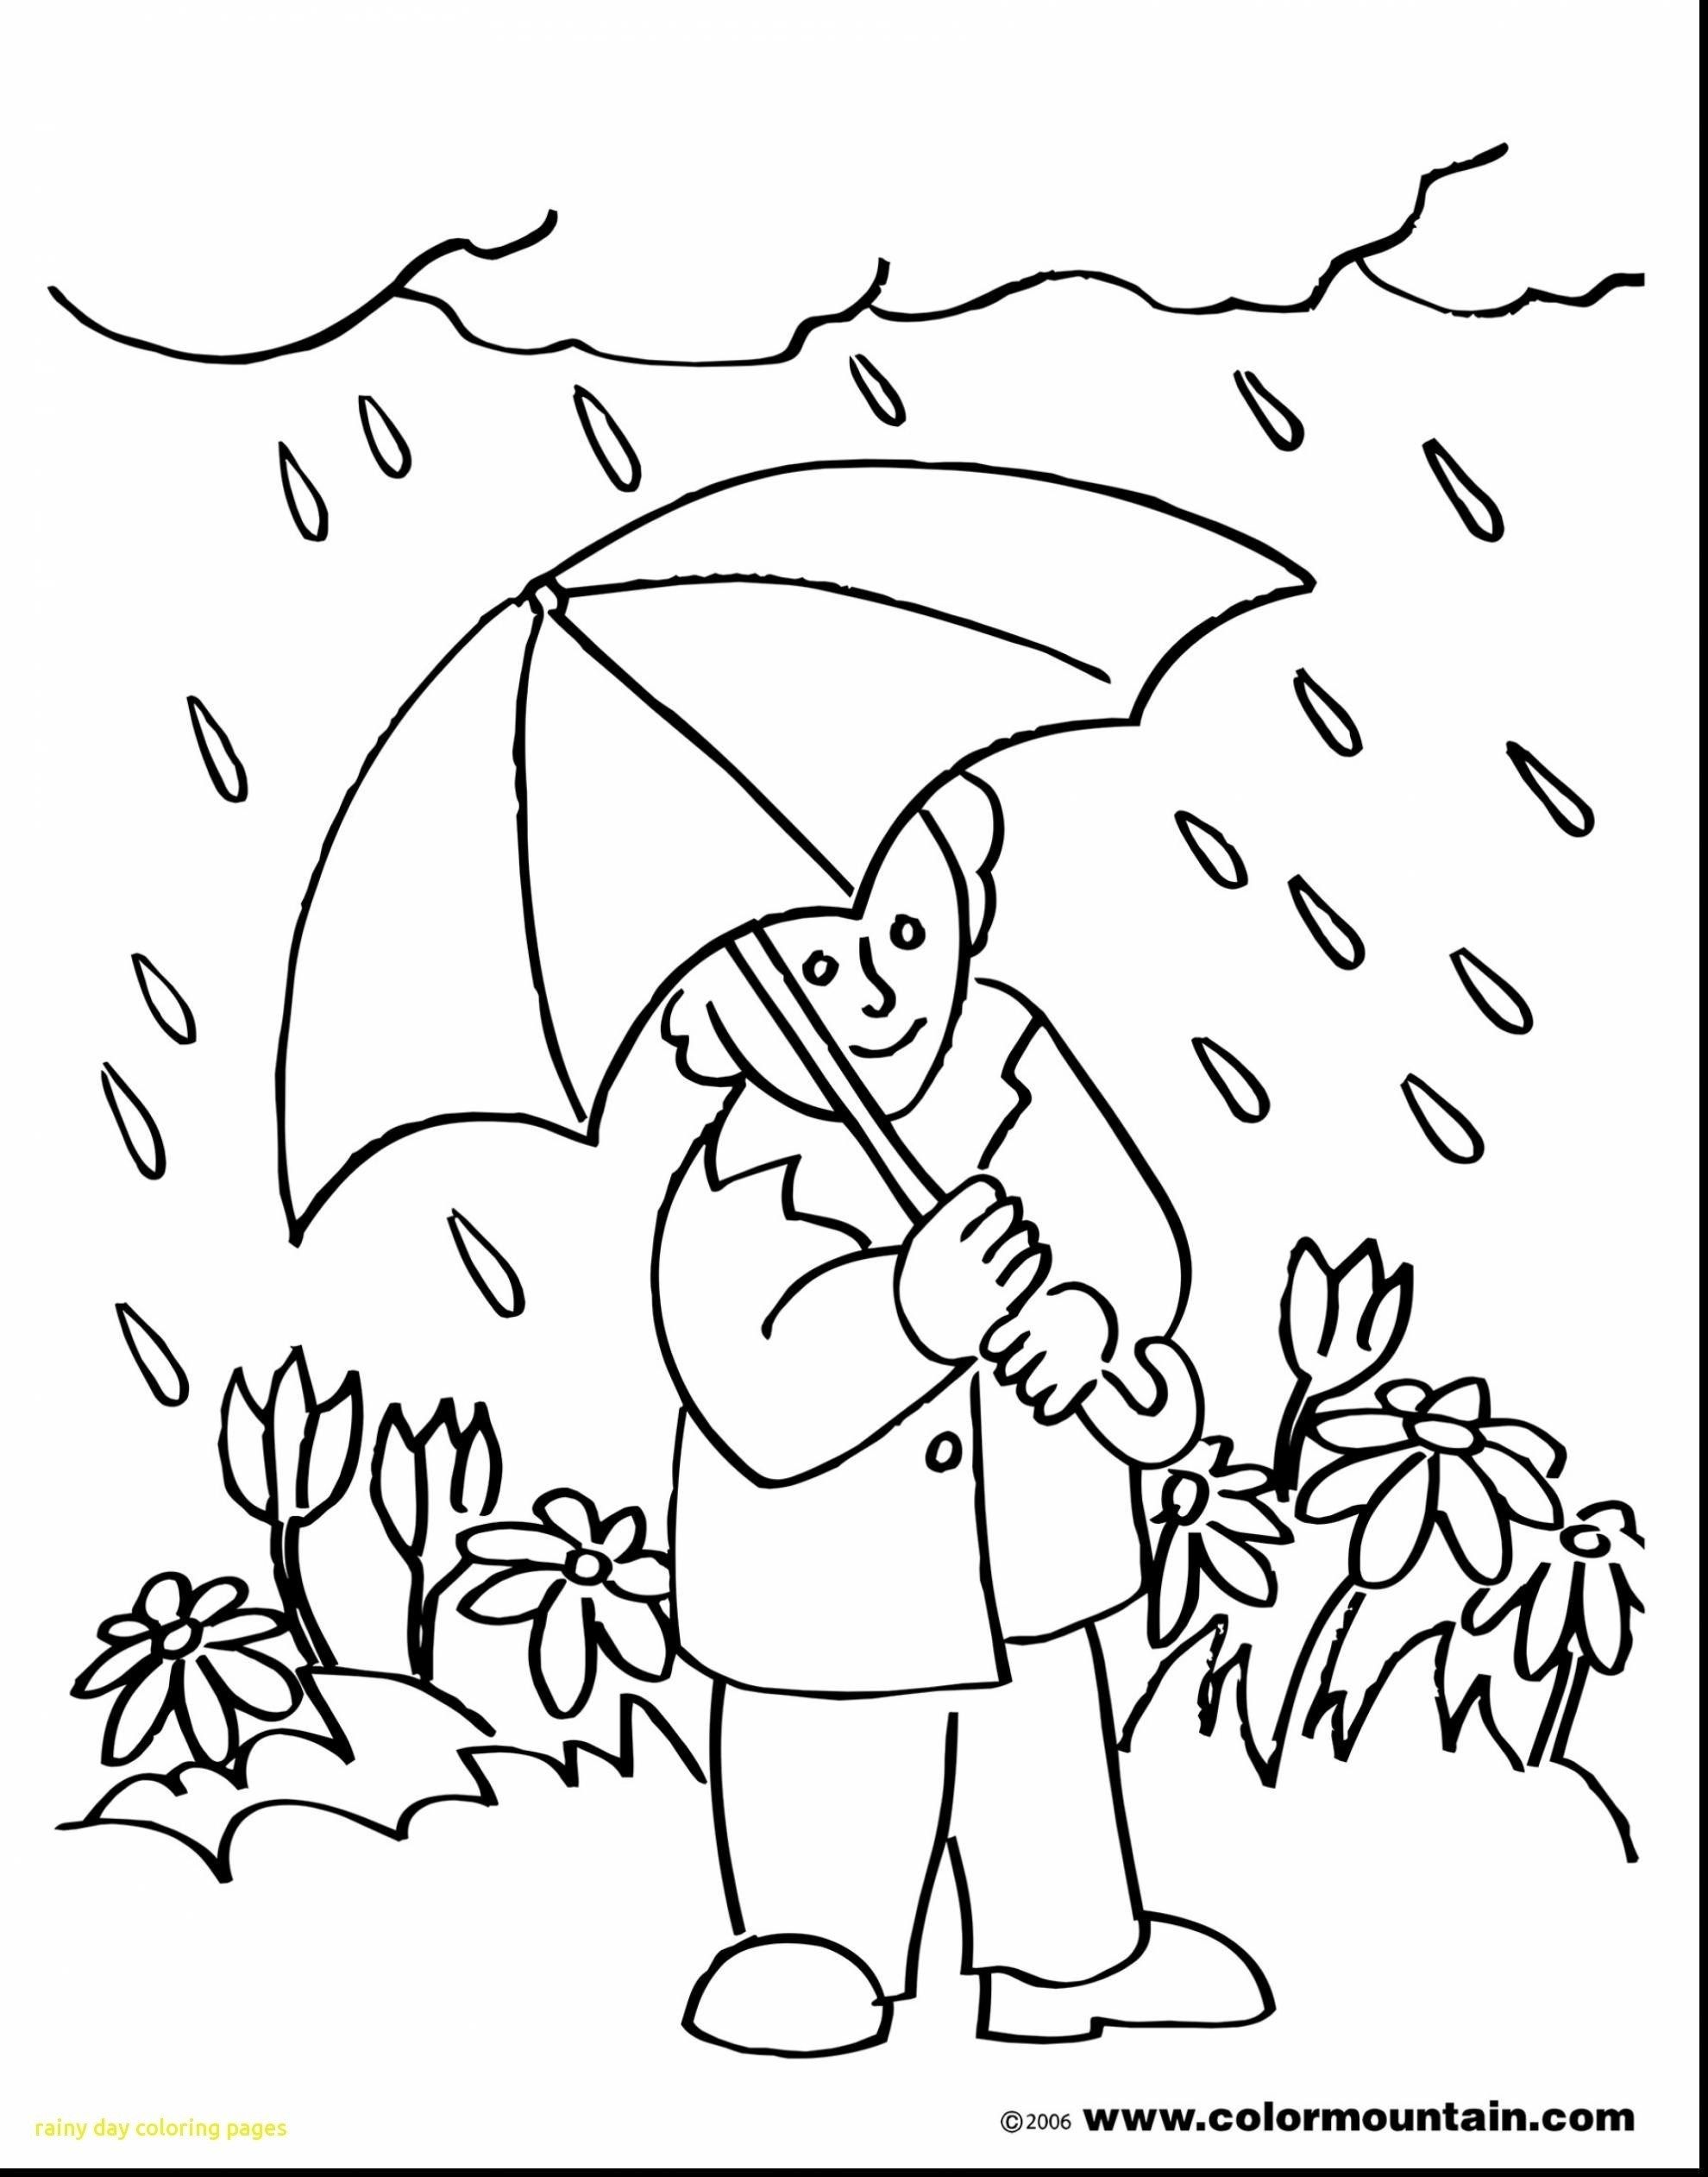 rainy-day-coloring-page-for-preschoolers-free-rain-printable-kids